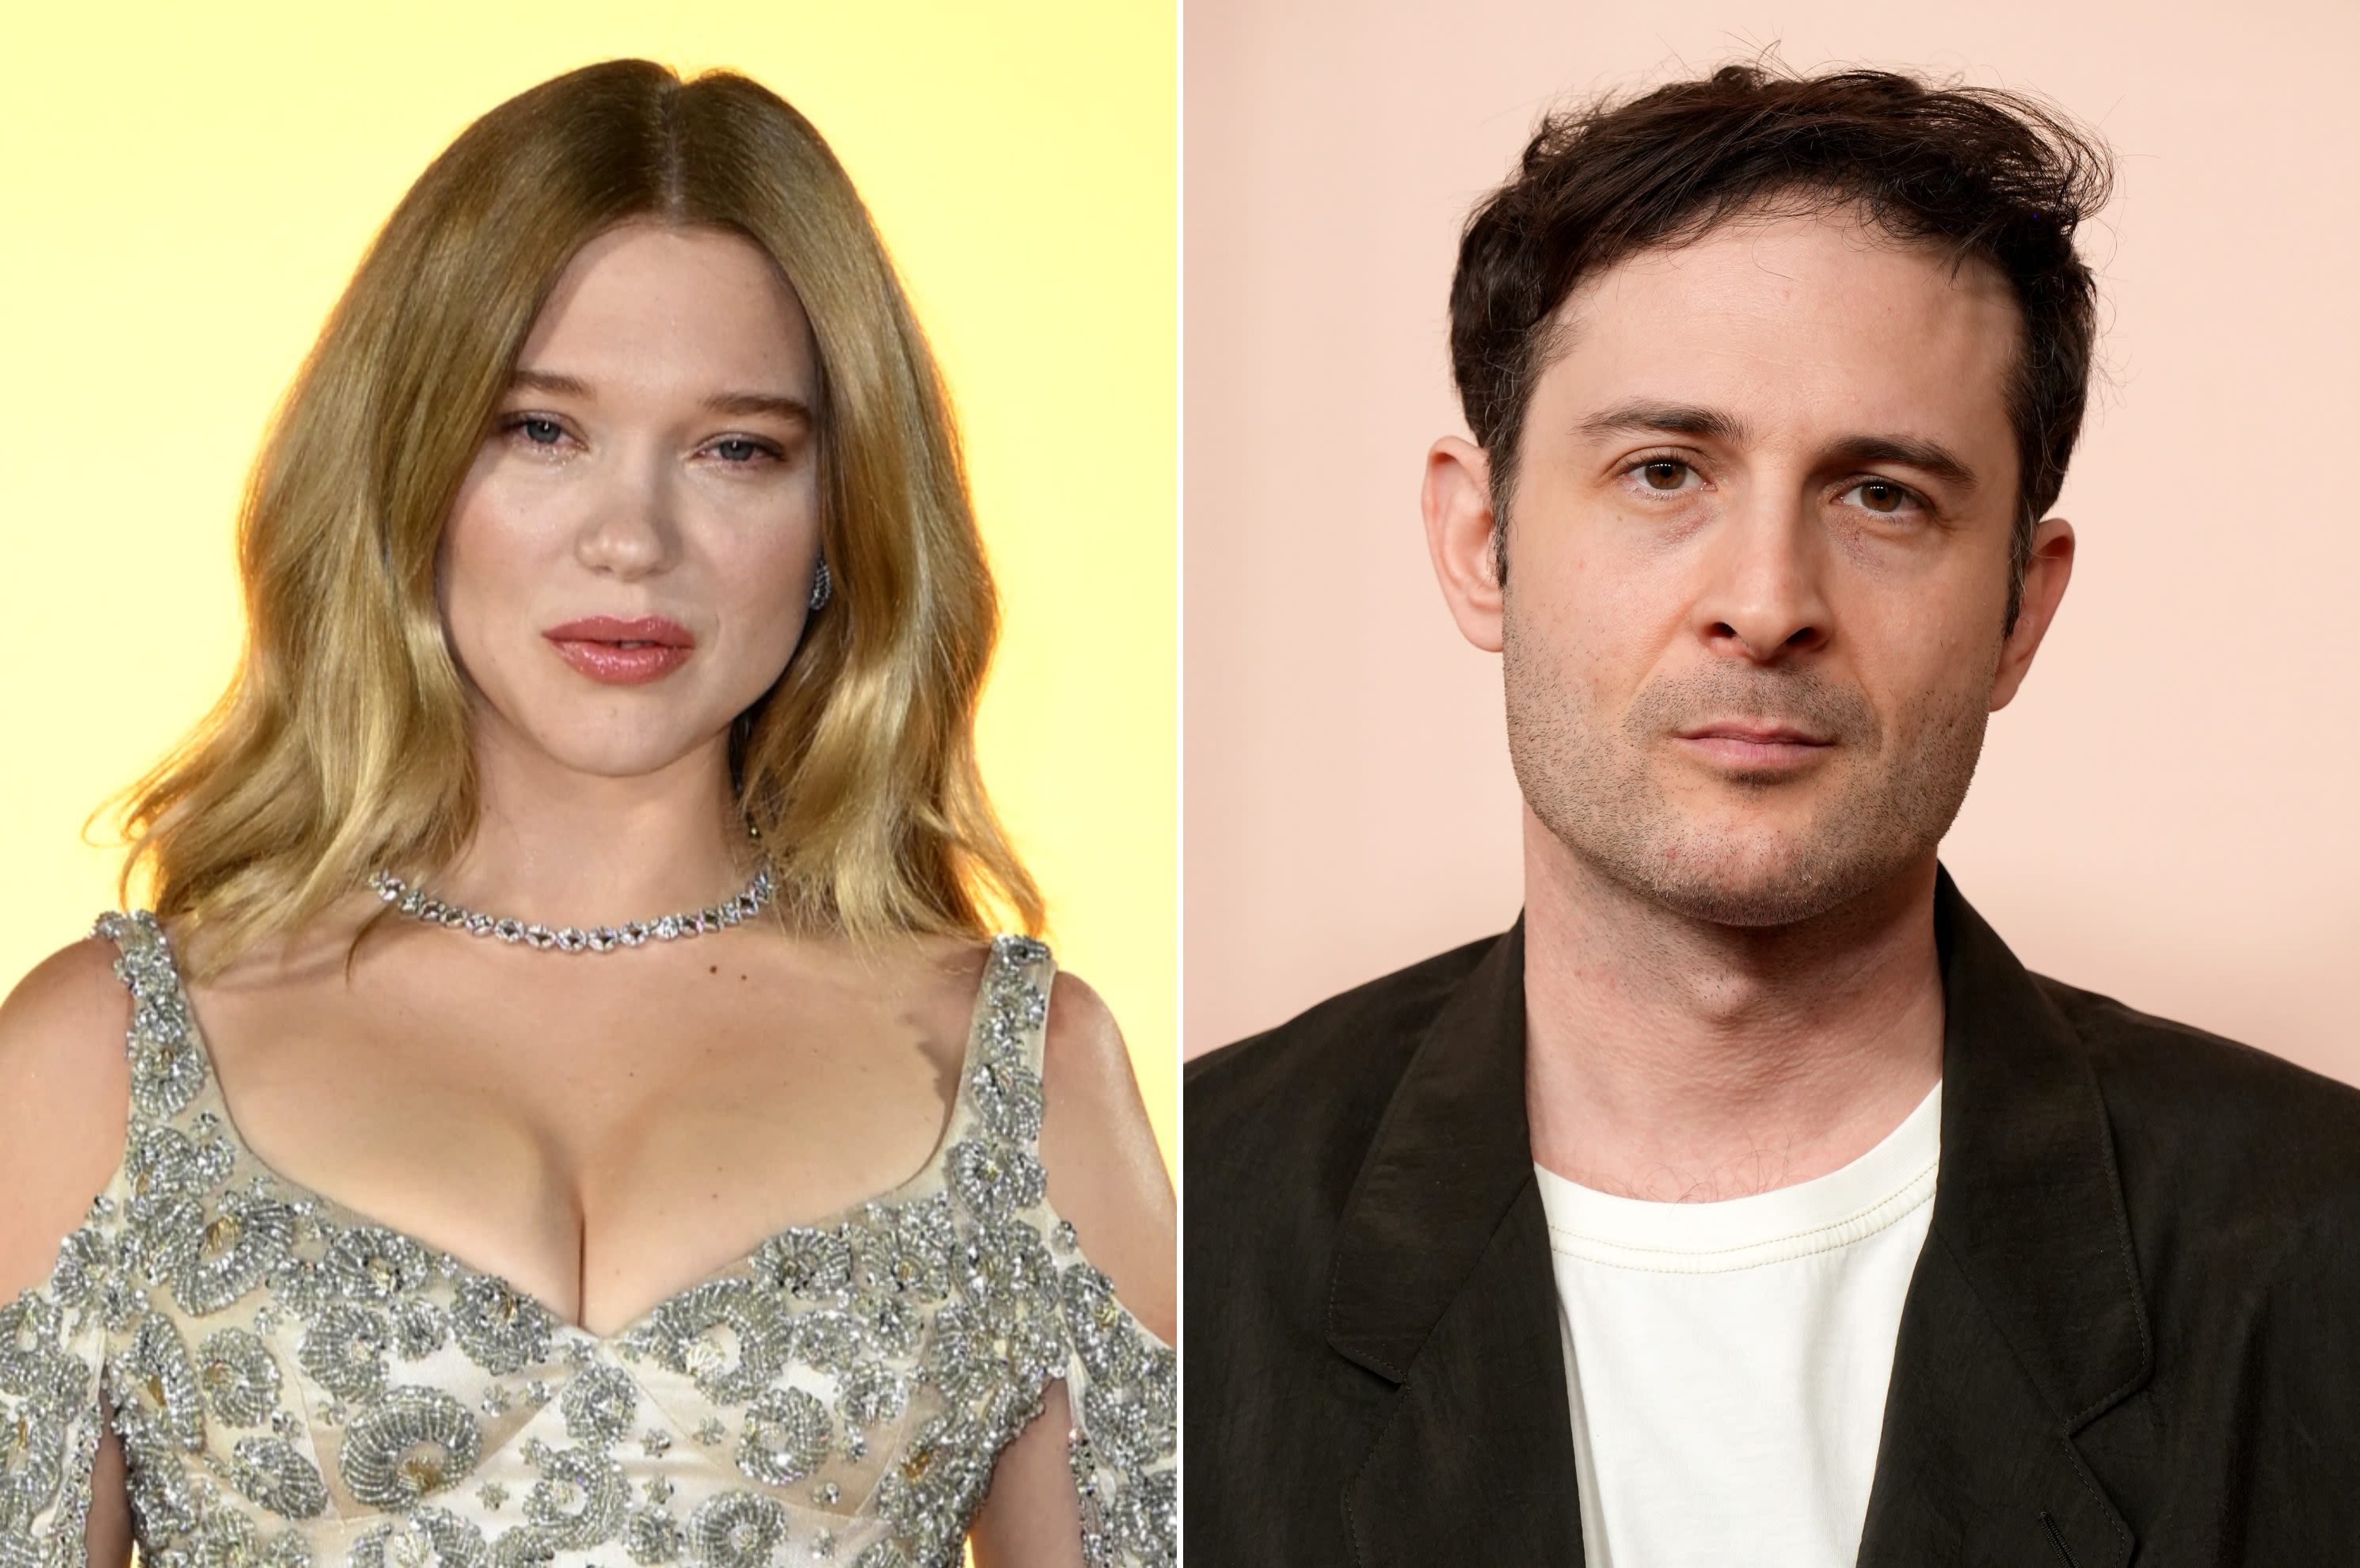 Léa Seydoux to Star in ‘Anatomy of a Fall’ Co-Writer Arthur Harari’s Next Film ‘The Unknown’ From Pathe (EXCLUSIVE)